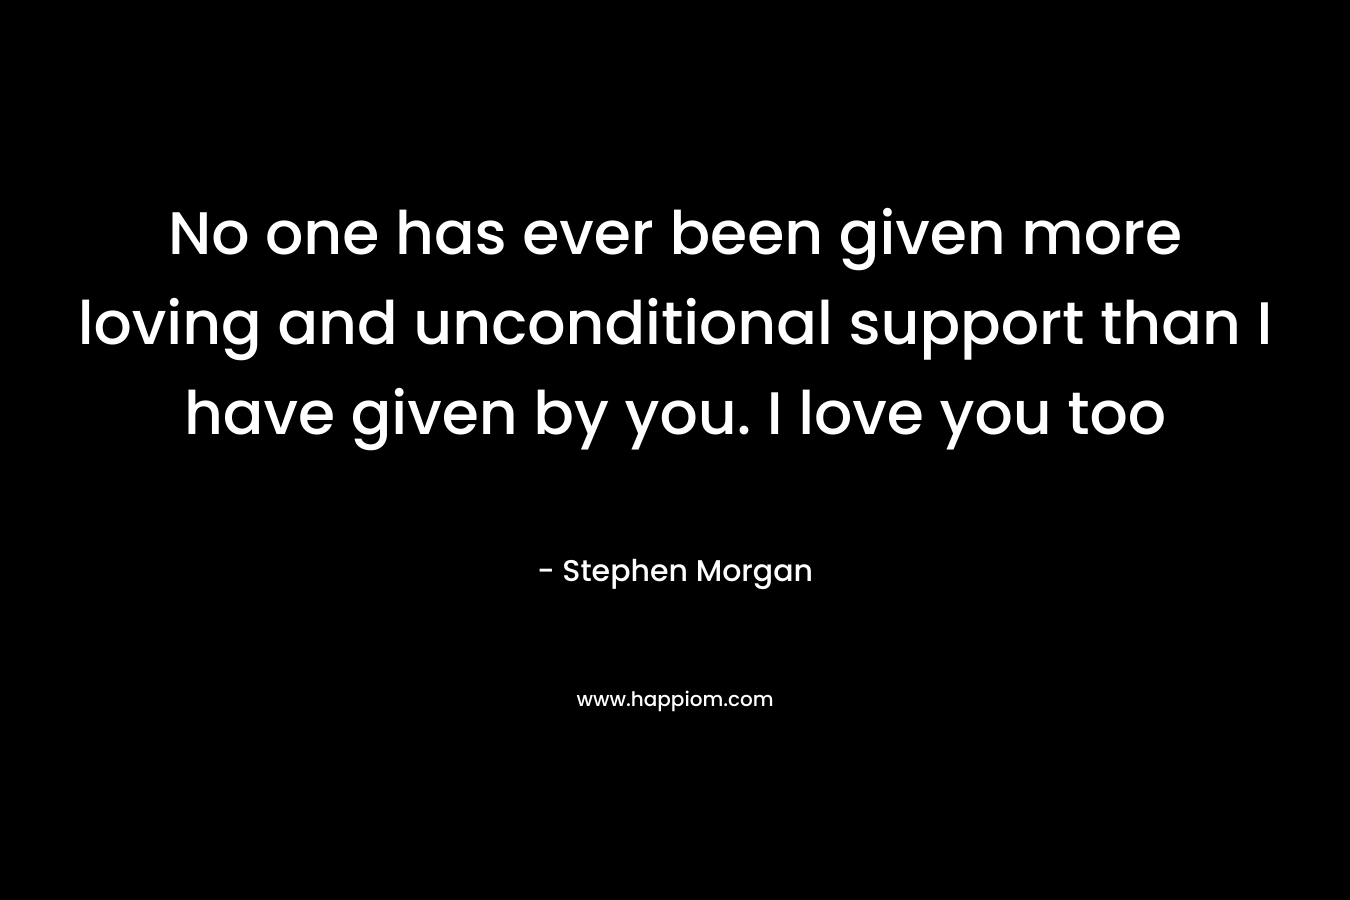 No one has ever been given more loving and unconditional support than I have given by you. I love you too – Stephen Morgan